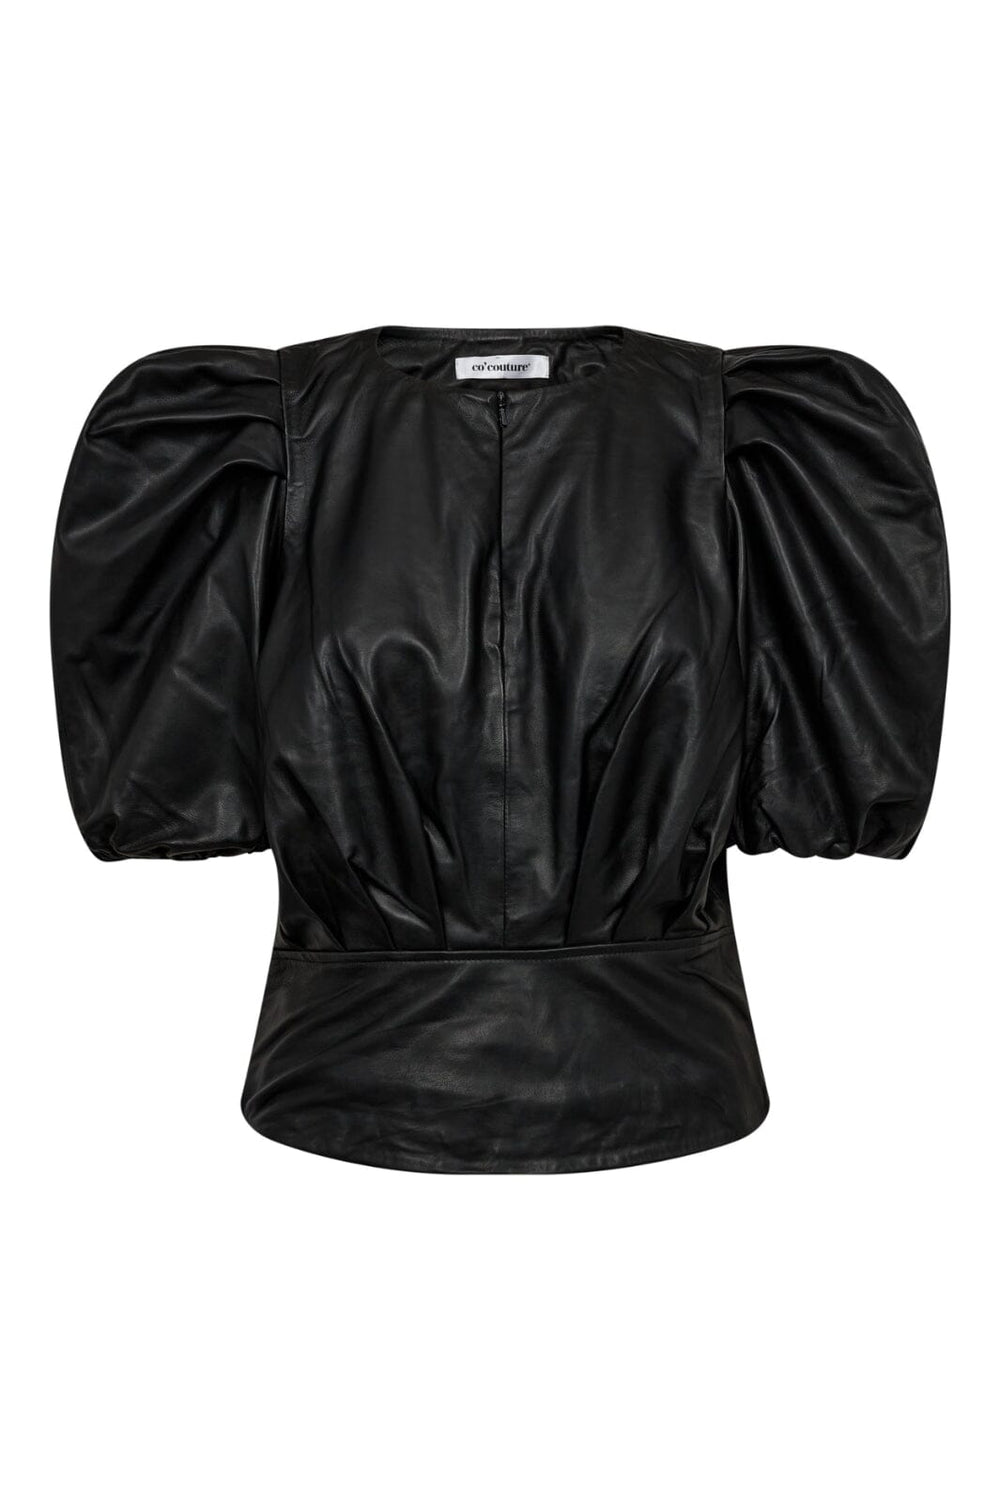 Co´couture - Phoebecc Ss Puff Blouse - 96 Black Bluser 